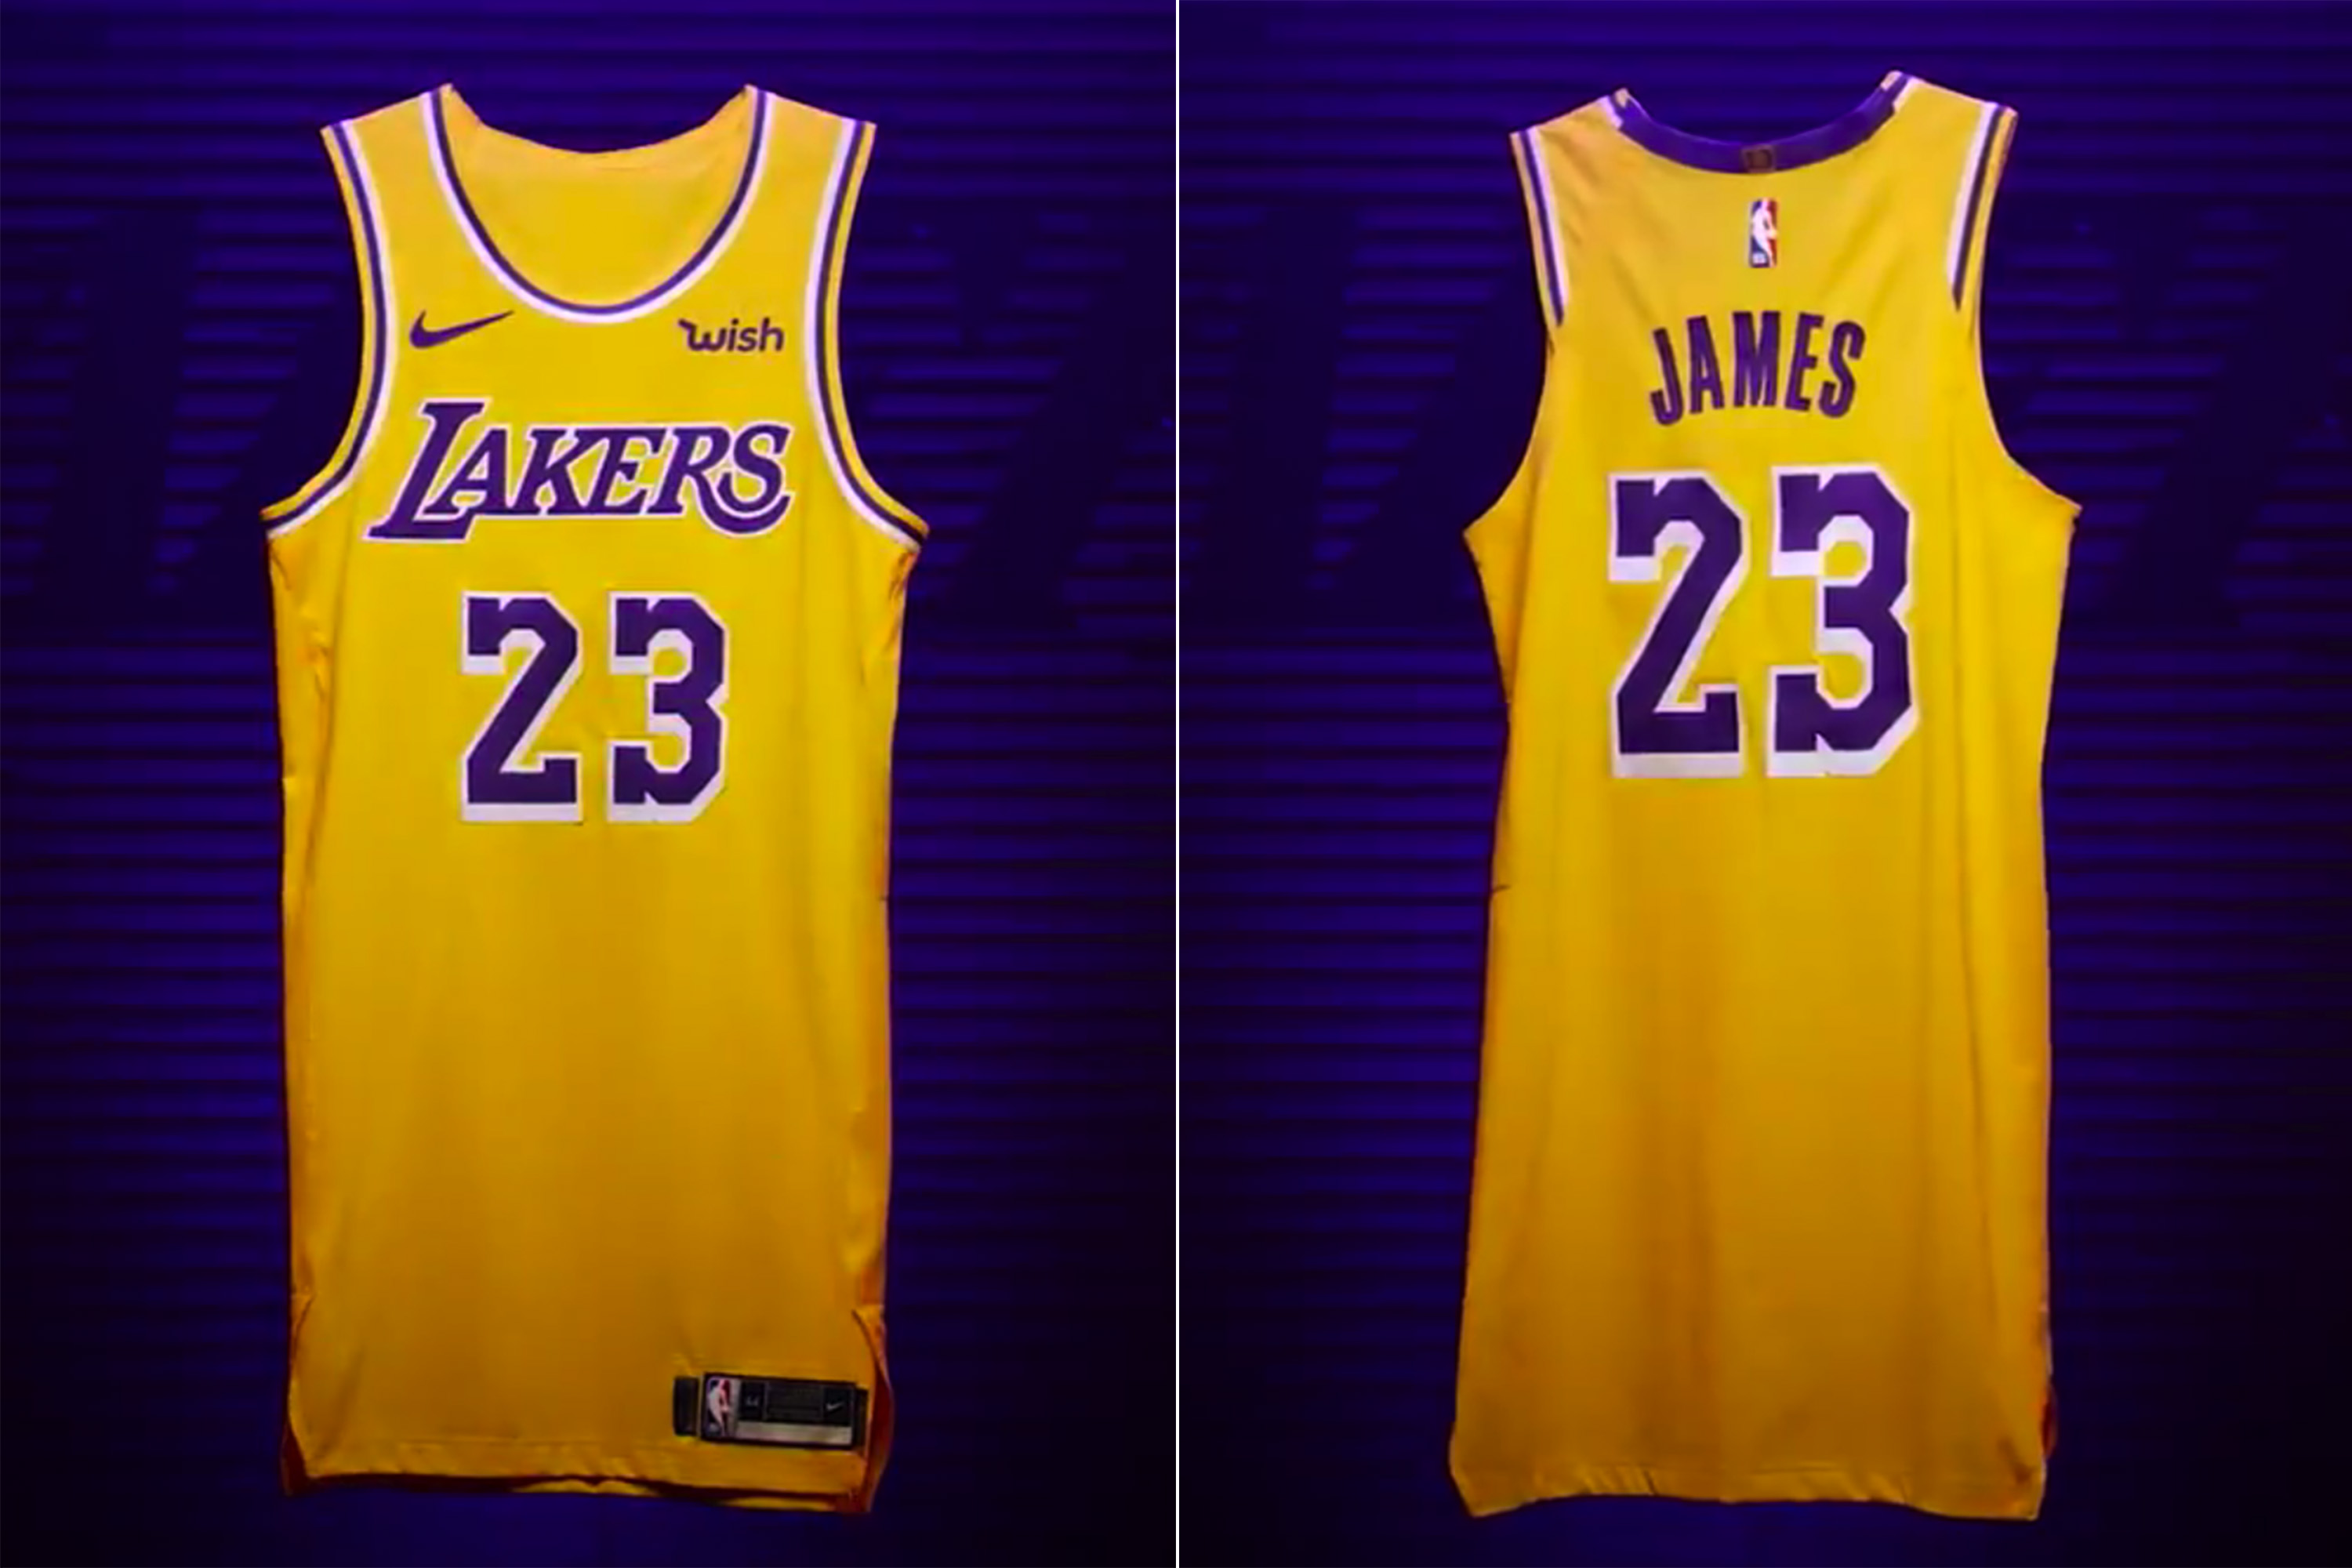 camisa do lakers